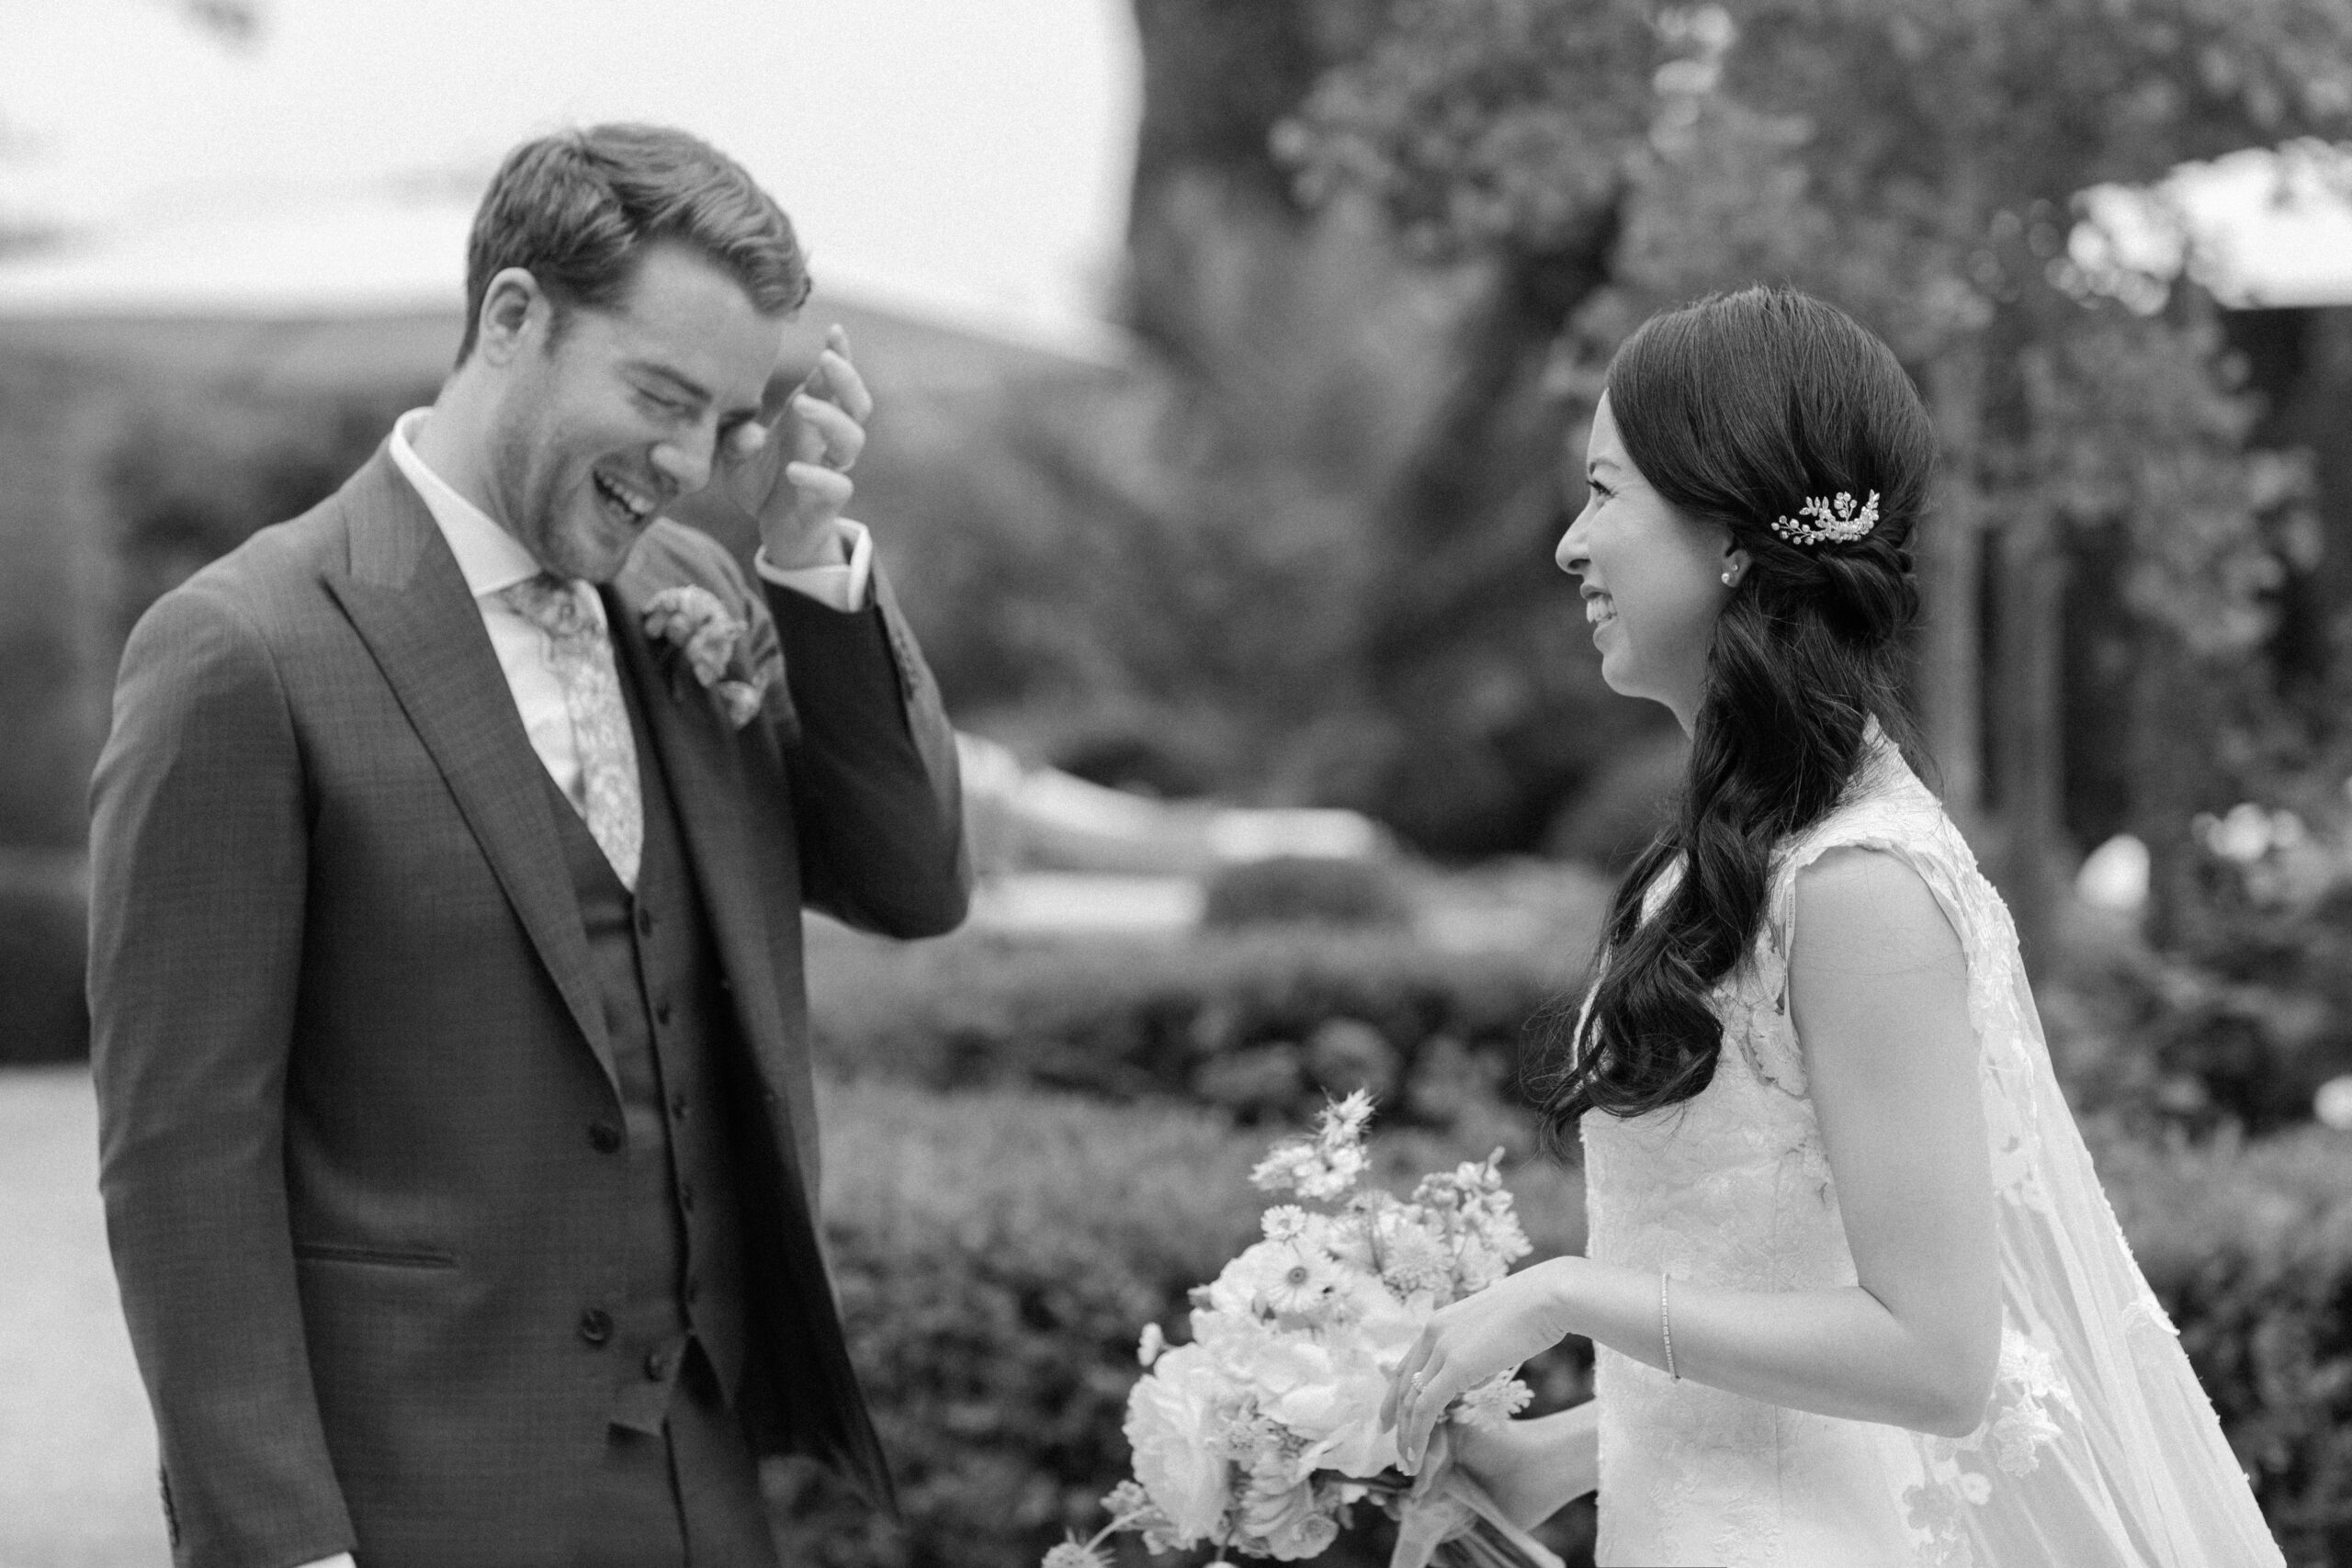 Emotional groom wiping a tear during a classic First Look with his bride at their wedding.